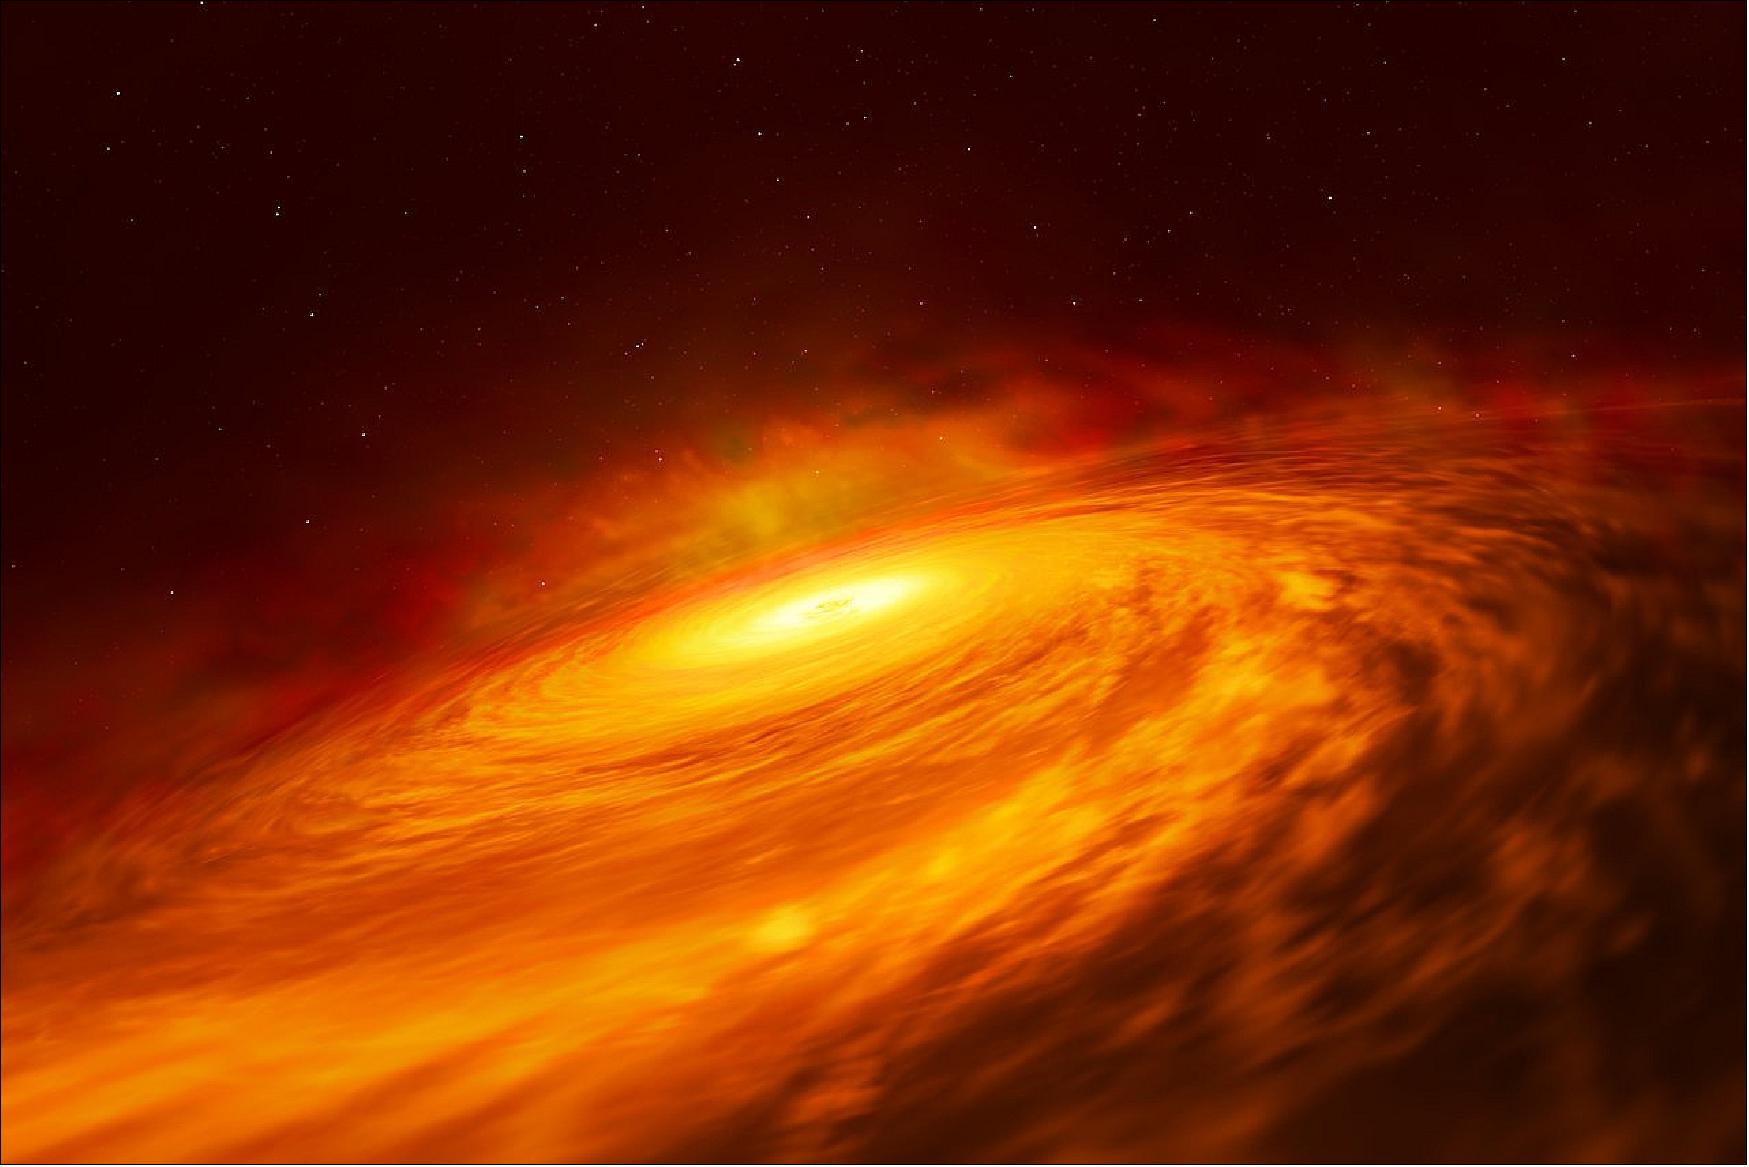 Figure 37: Artist’s impression of the peculiar thin disc of material circling a supermassive black hole at the heart of the spiral galaxy NGC 3147, located 130 million light-years away (image credit: ESA/Hubble, M. Kornmesser)